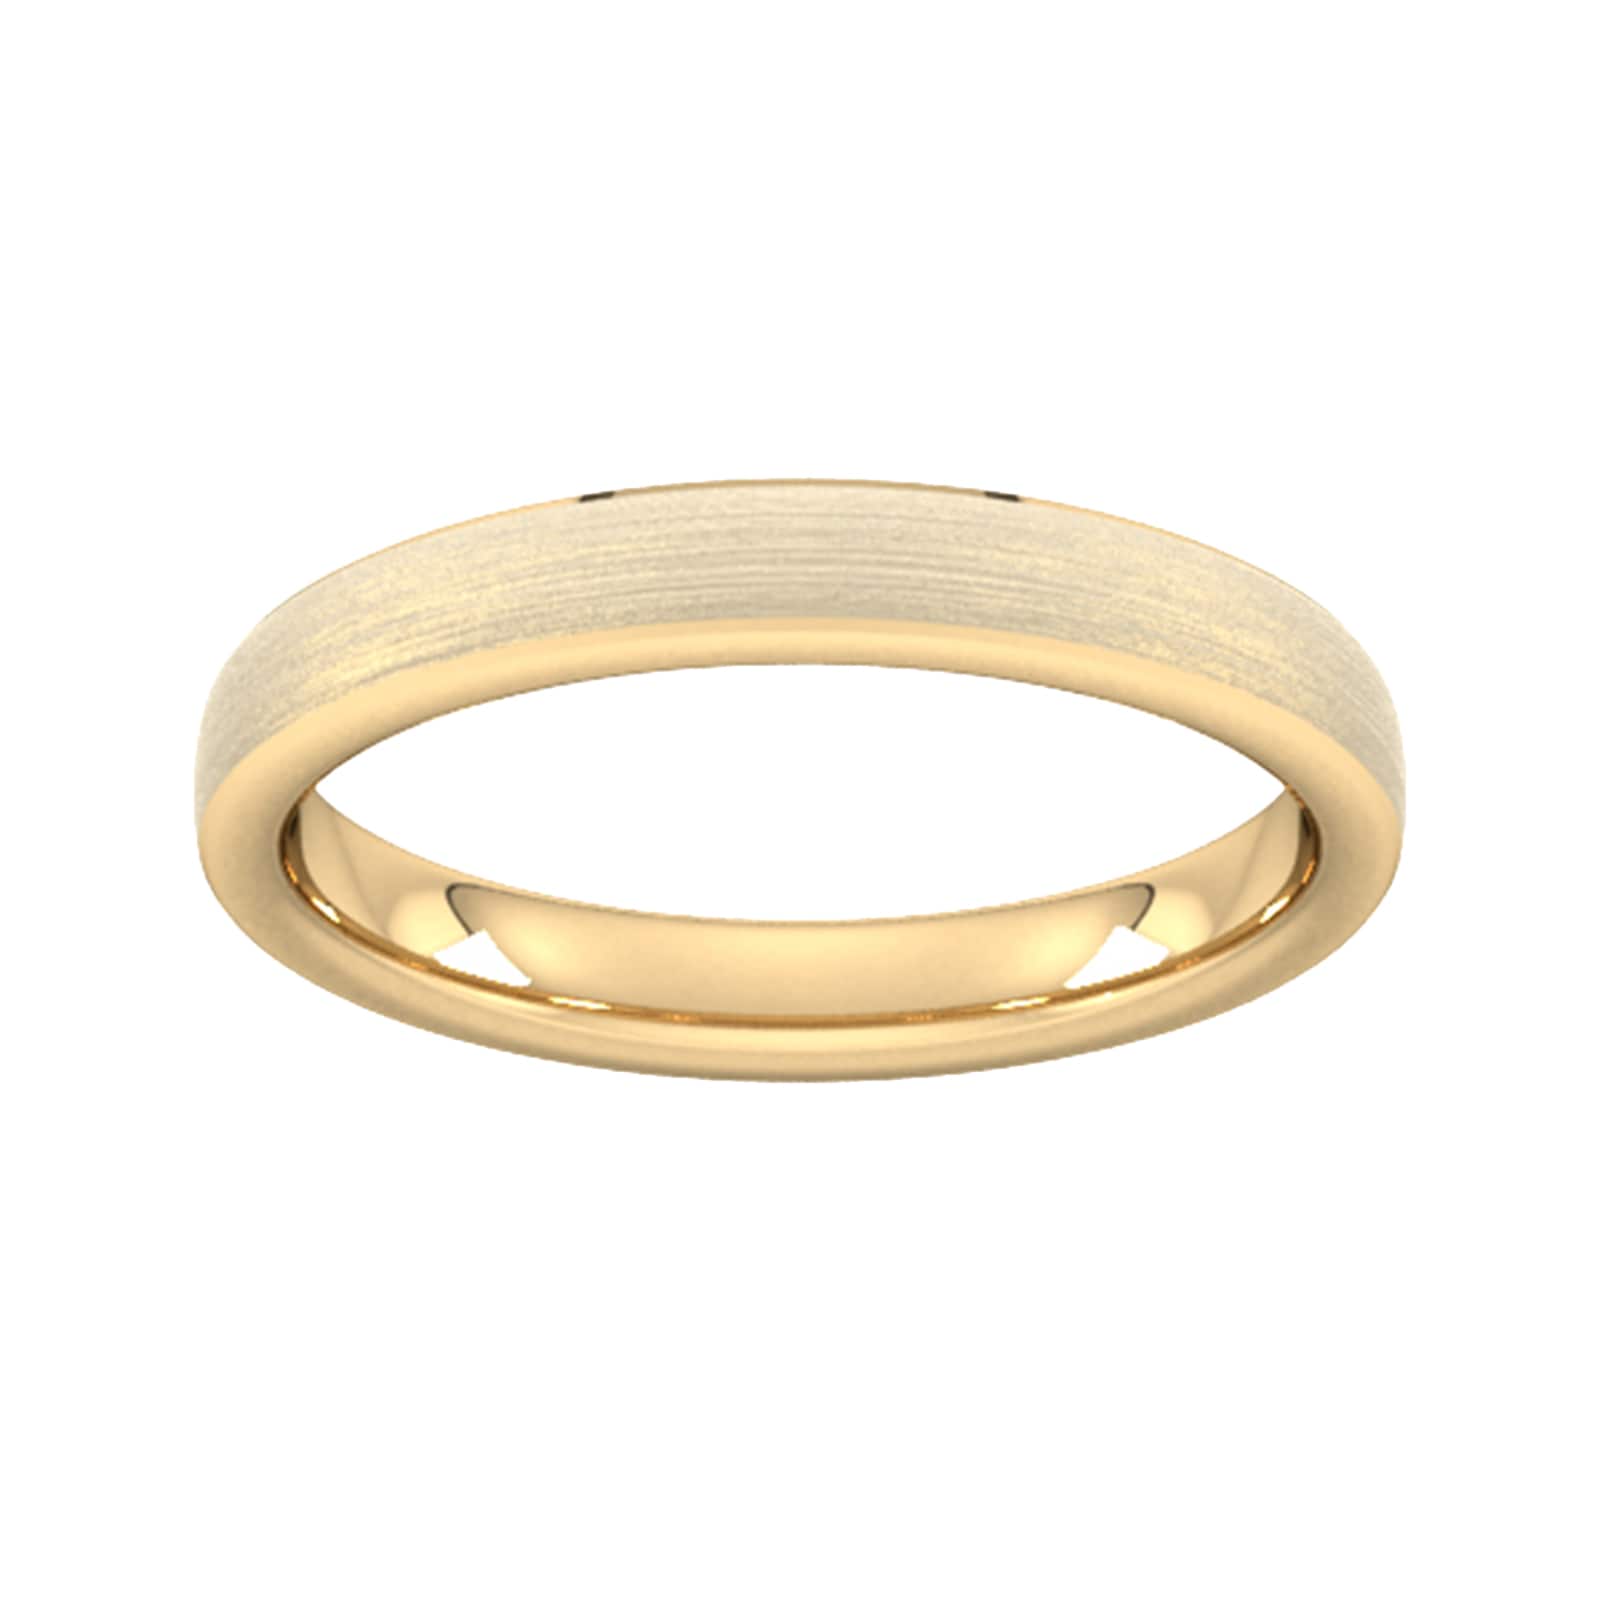 3mm D Shape Standard Polished Chamfered Edges With Matt Centre Wedding Ring In 18 Carat Yellow Gold - Ring Size U